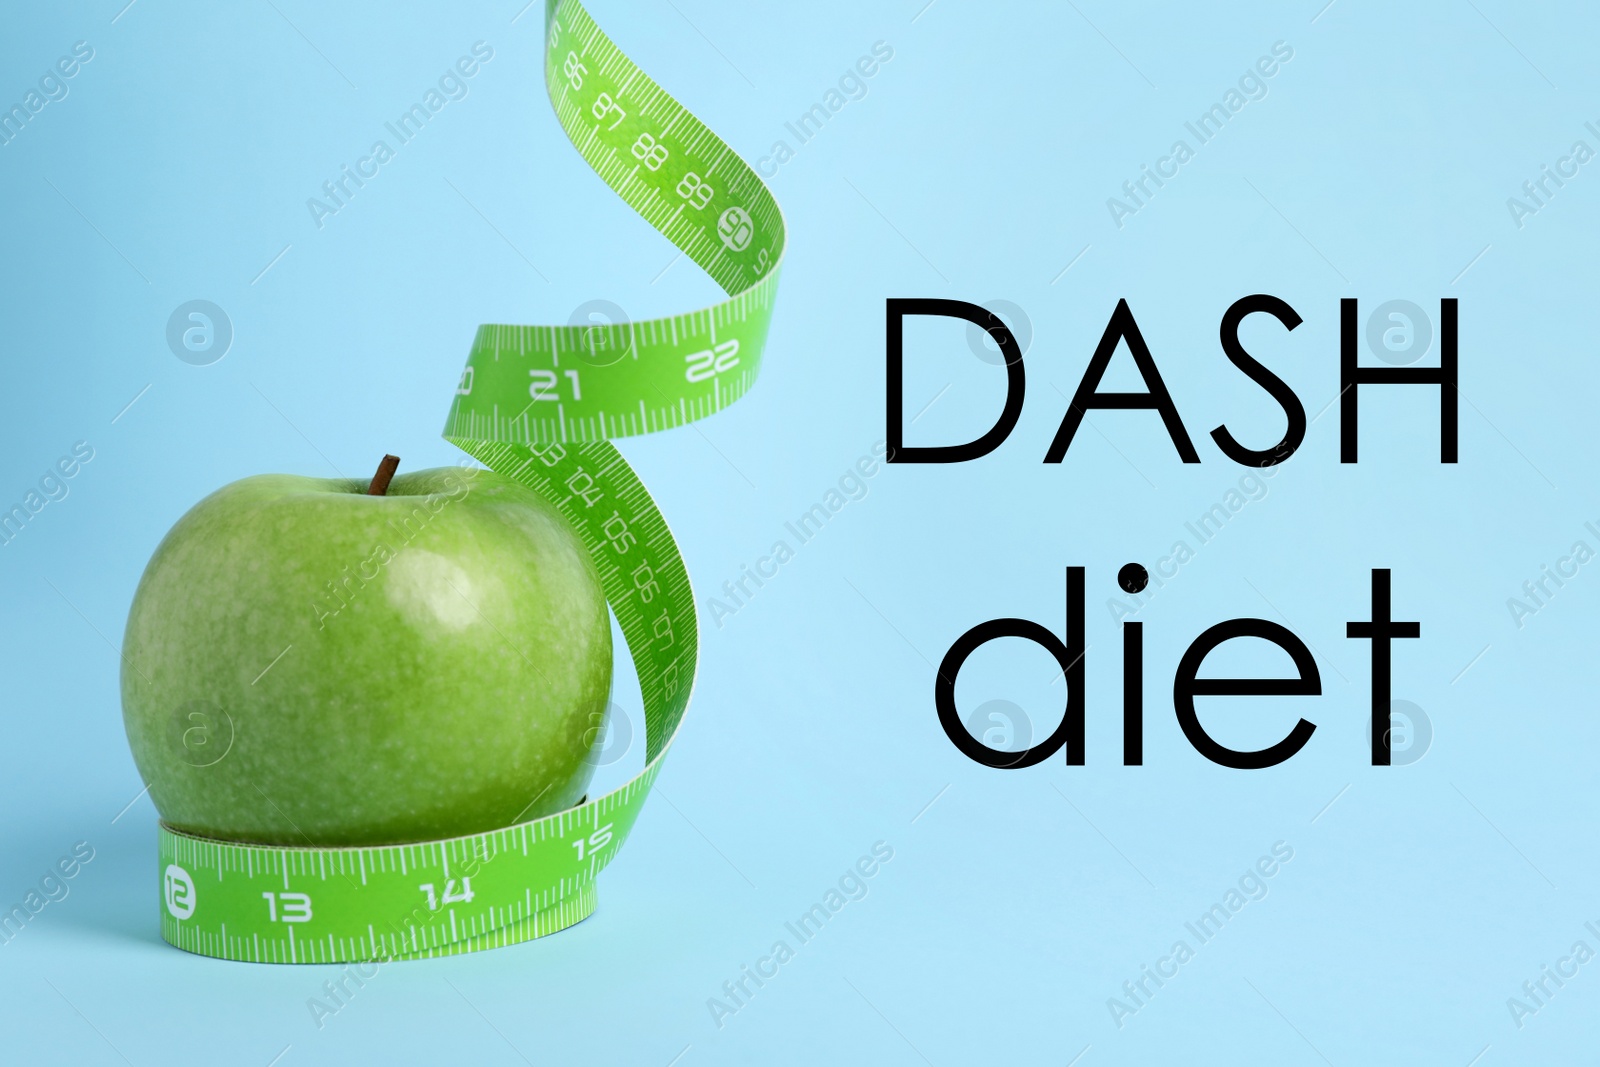 Image of DASH diet to stop hypertension. Ripe green apple and measuring tape on light blue background